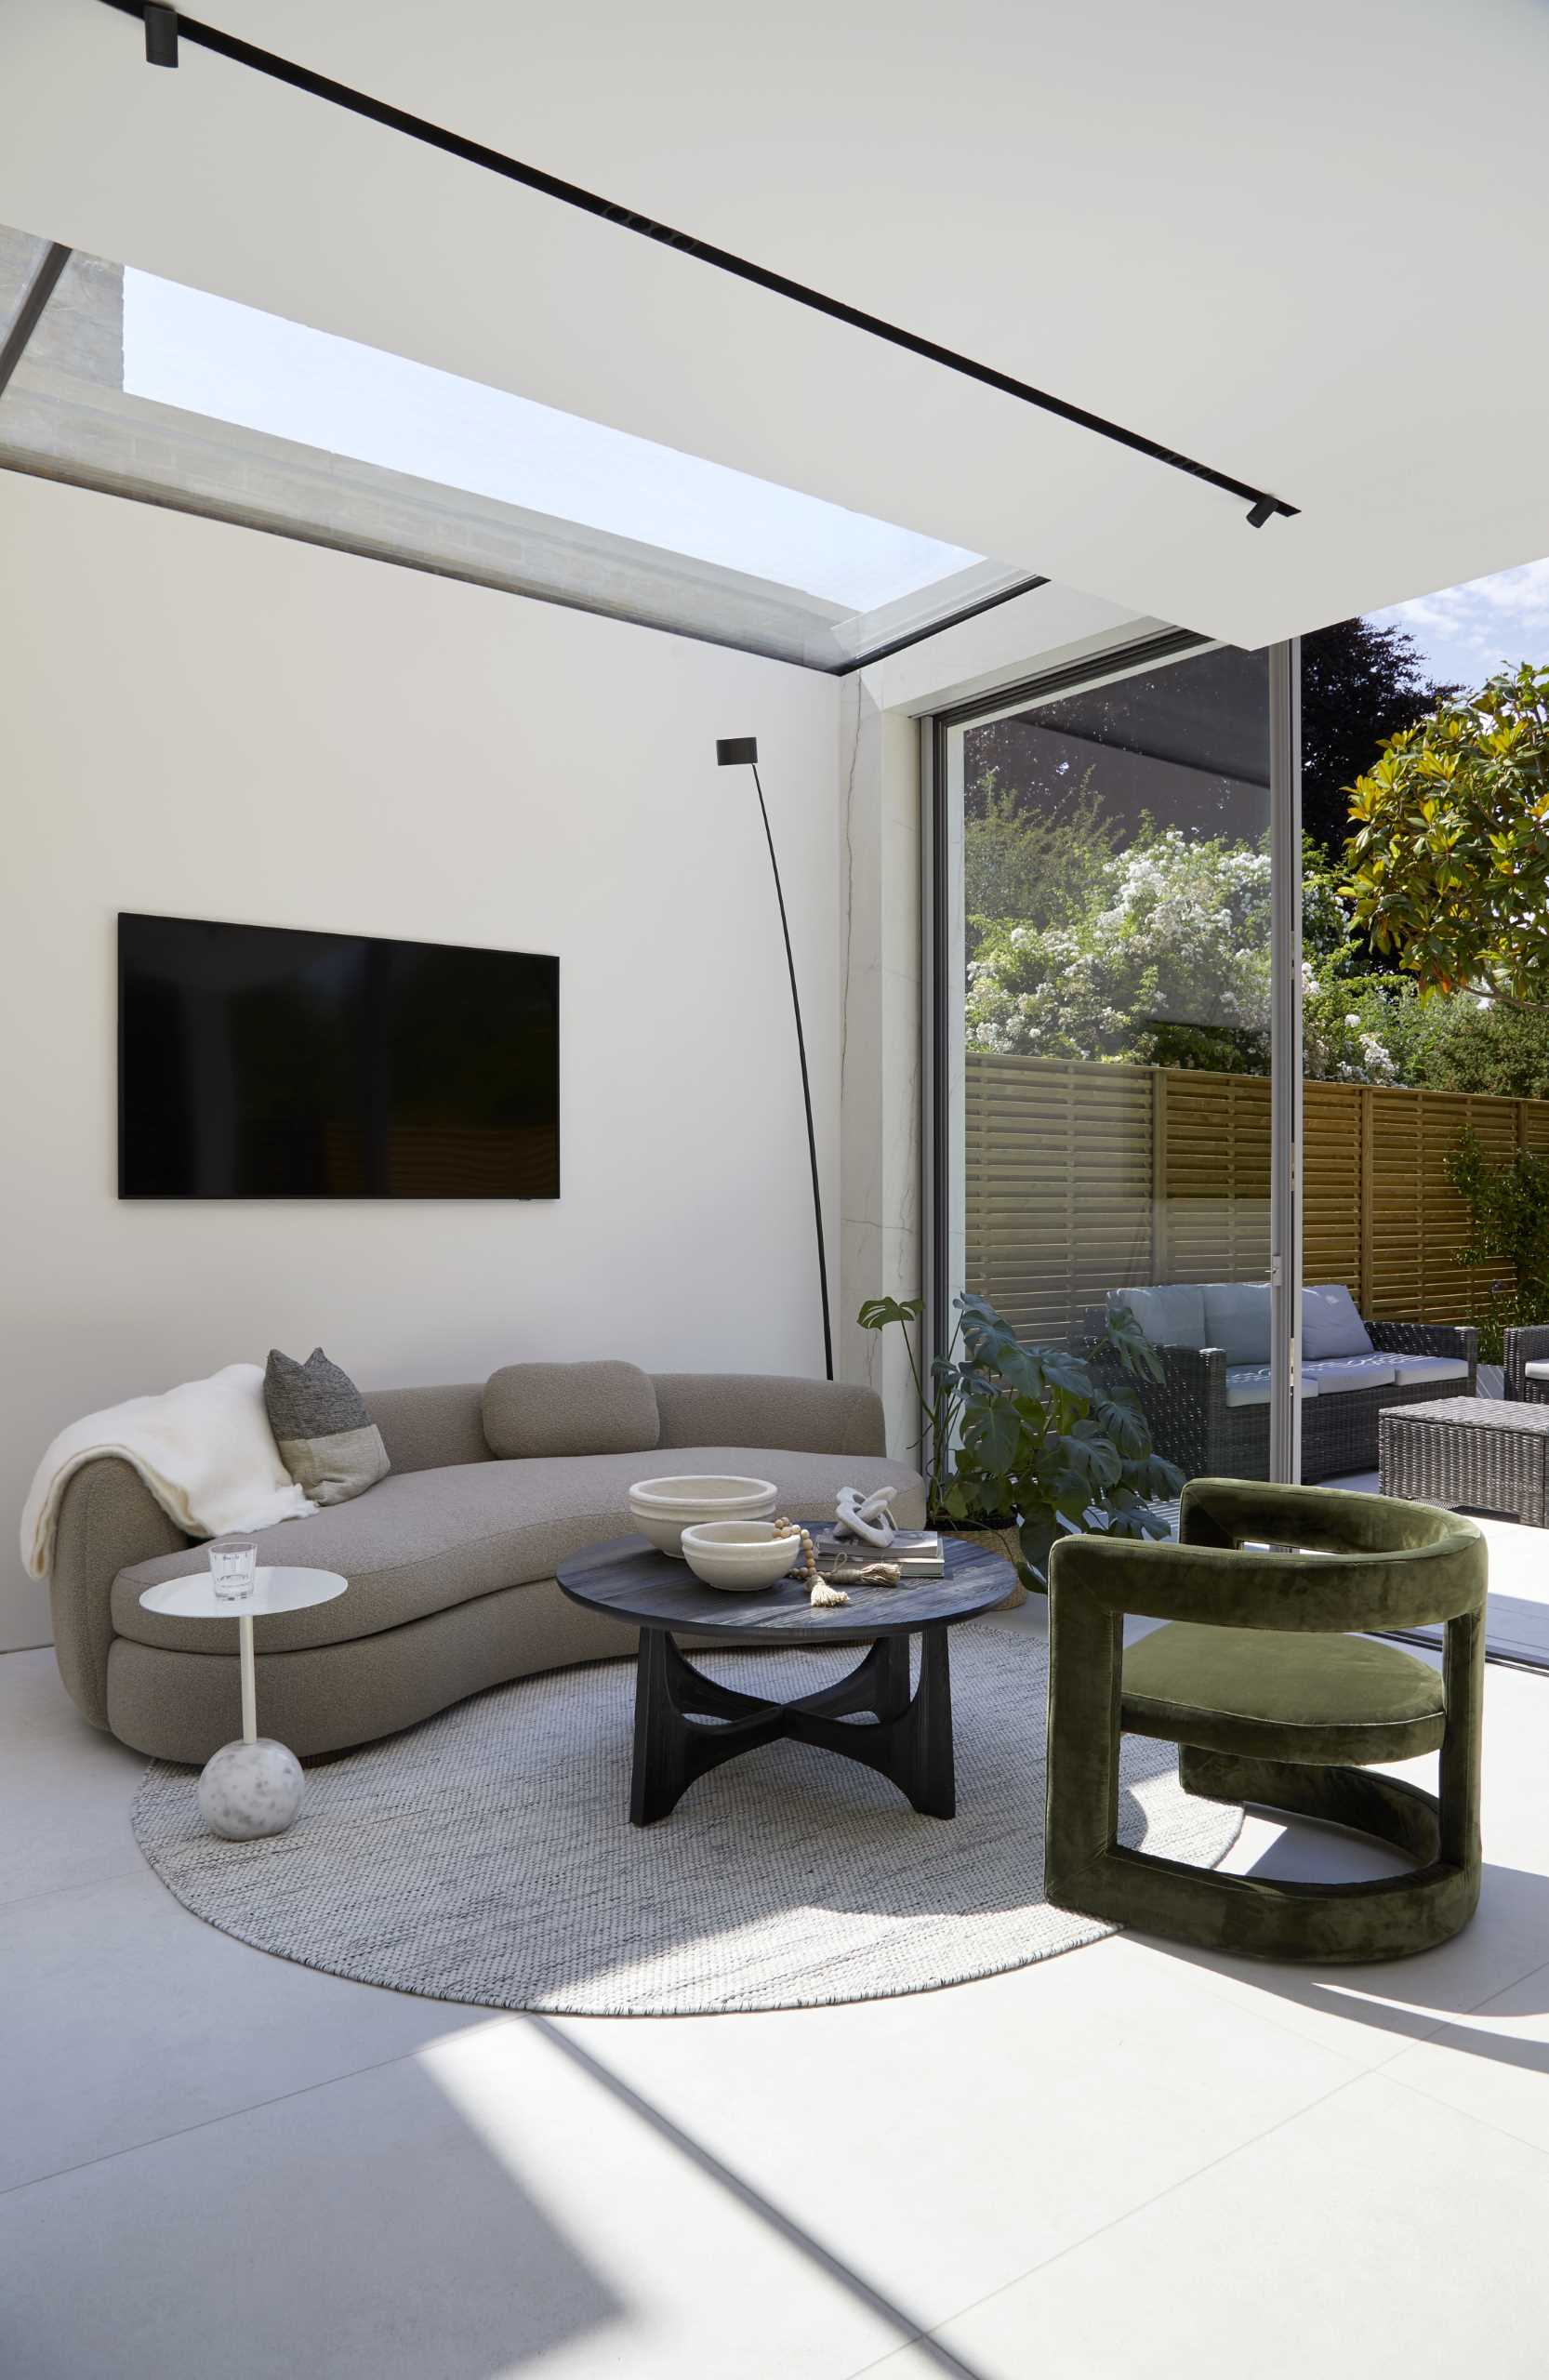 An open plan living area with a skylight, that also opens to the garden.